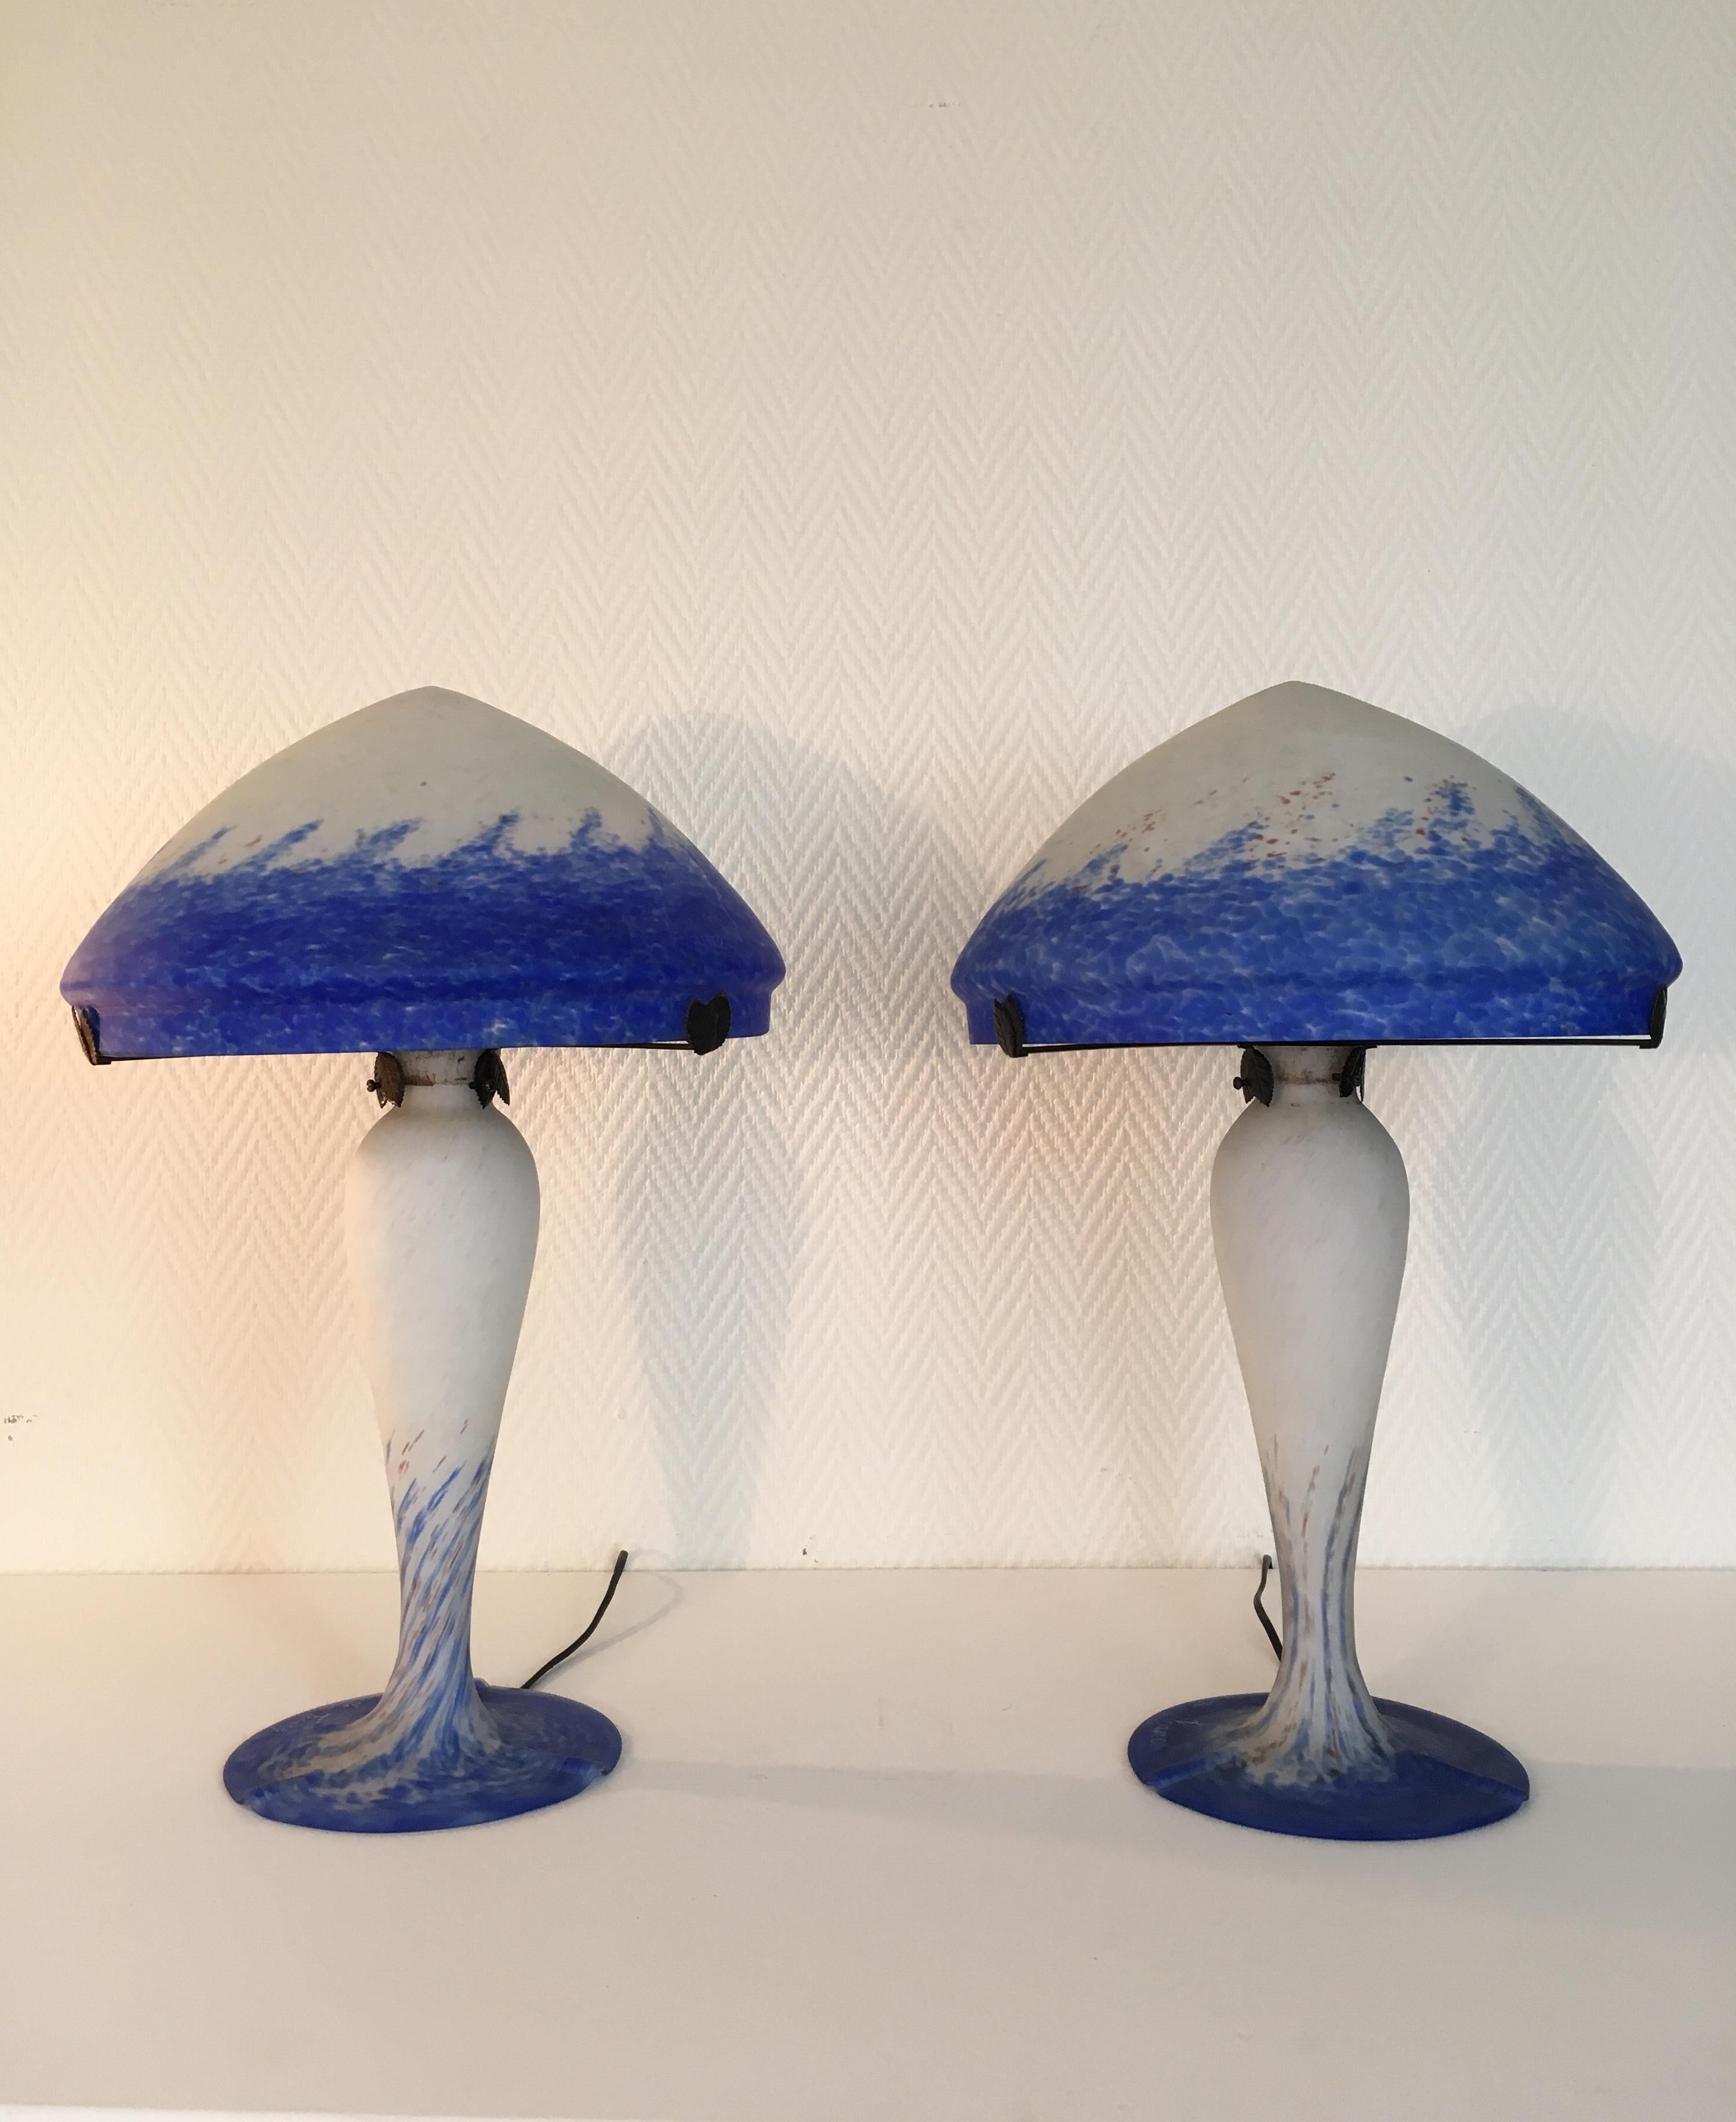 Stunning table lamps by Art de France. They were manufactured in France and feature blue, white and even some red colors. They remain in very good condition. Pieces will be carefully packed and send insured. 